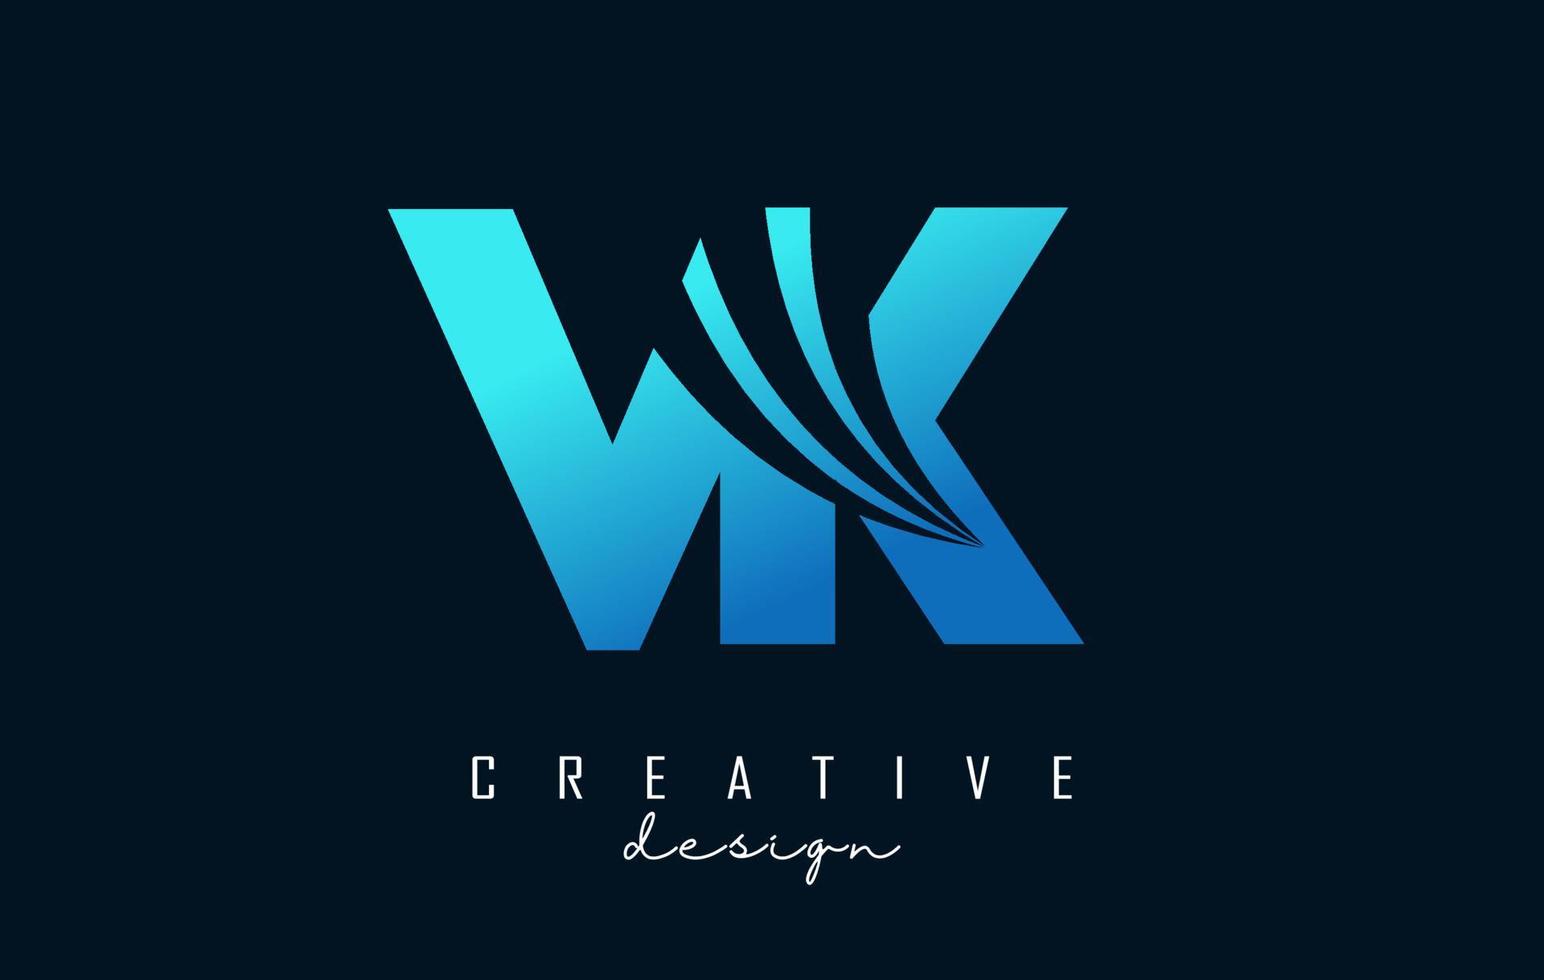 Creative blue letters VK v k logo with leading lines and road concept design. Letters with geometric design. vector